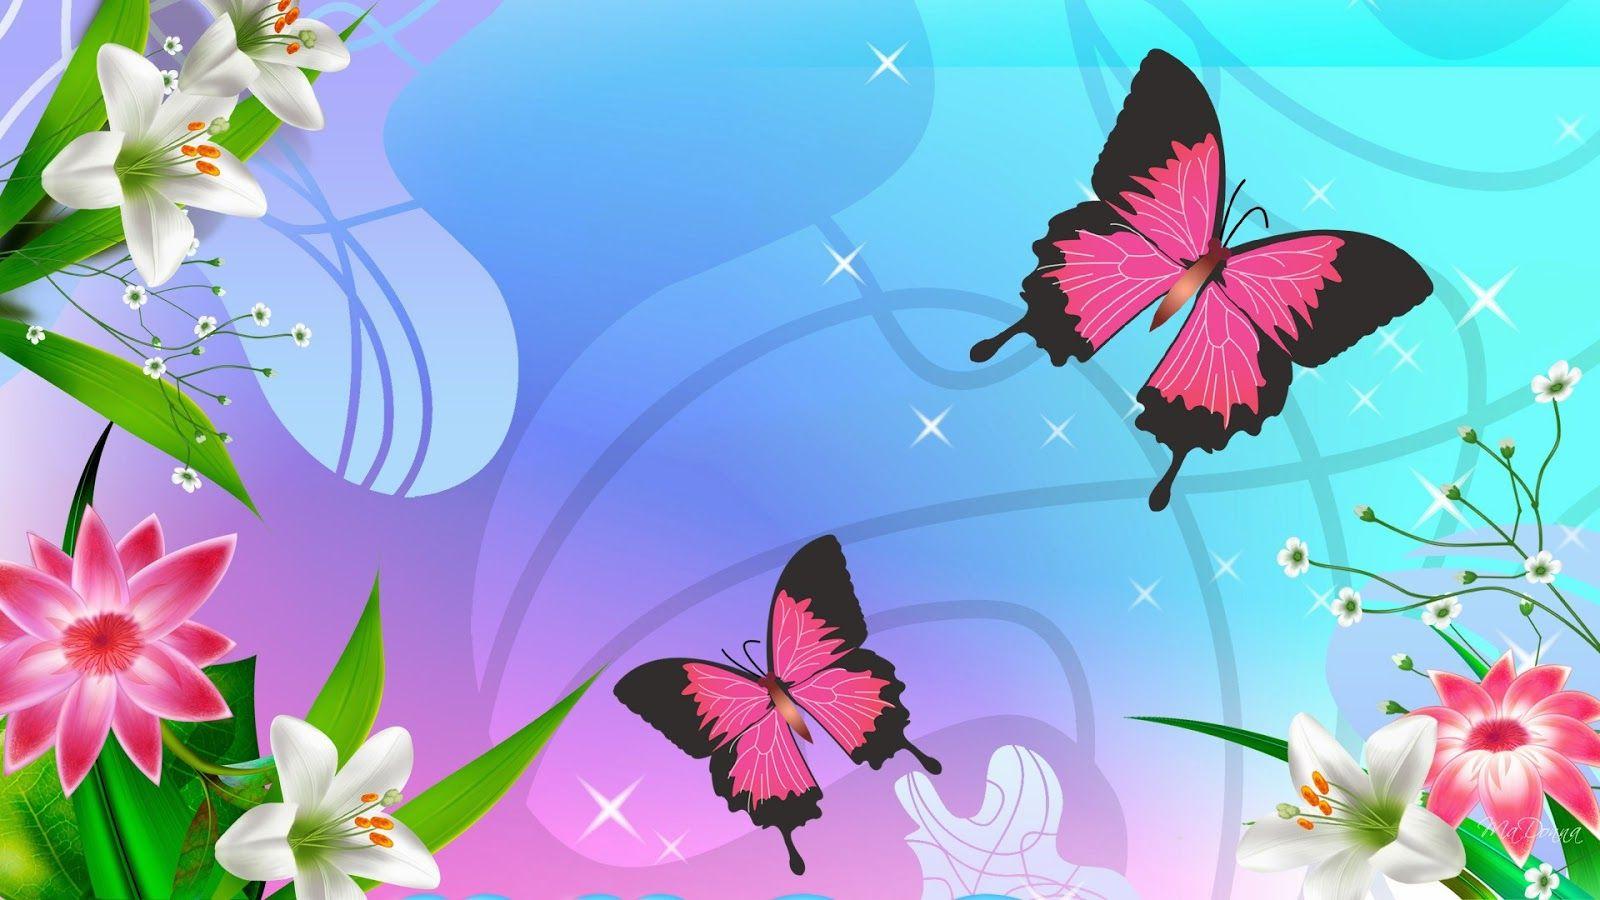 Charming butterfly wallpaper, image, pc download